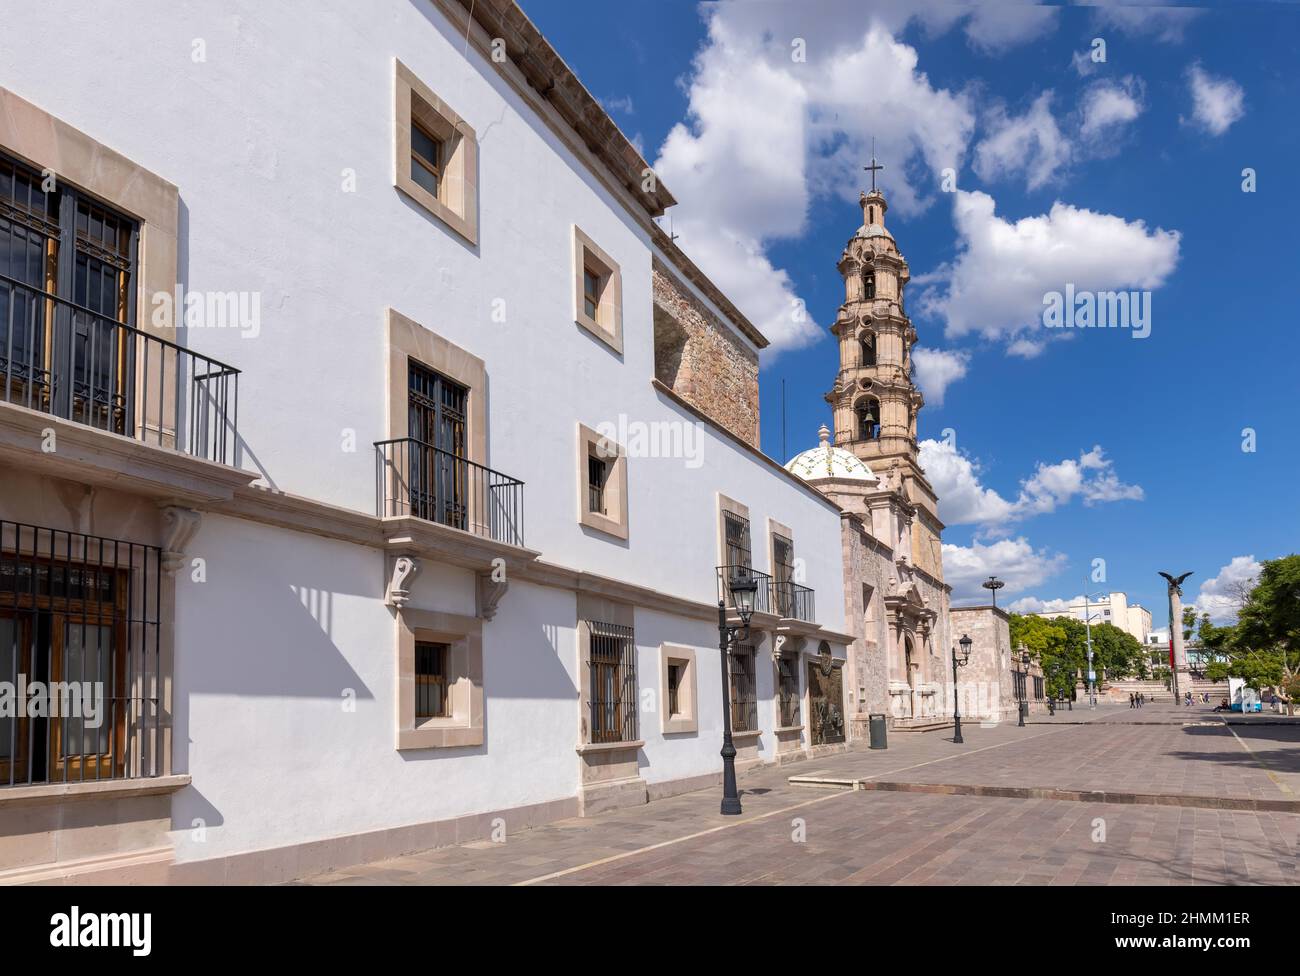 Central Mexico, Aguascalientes catholic churches, colorful streets and colonial houses in historic city center near Cathedral Basilica, one of the main city tourist attractions. Stock Photo